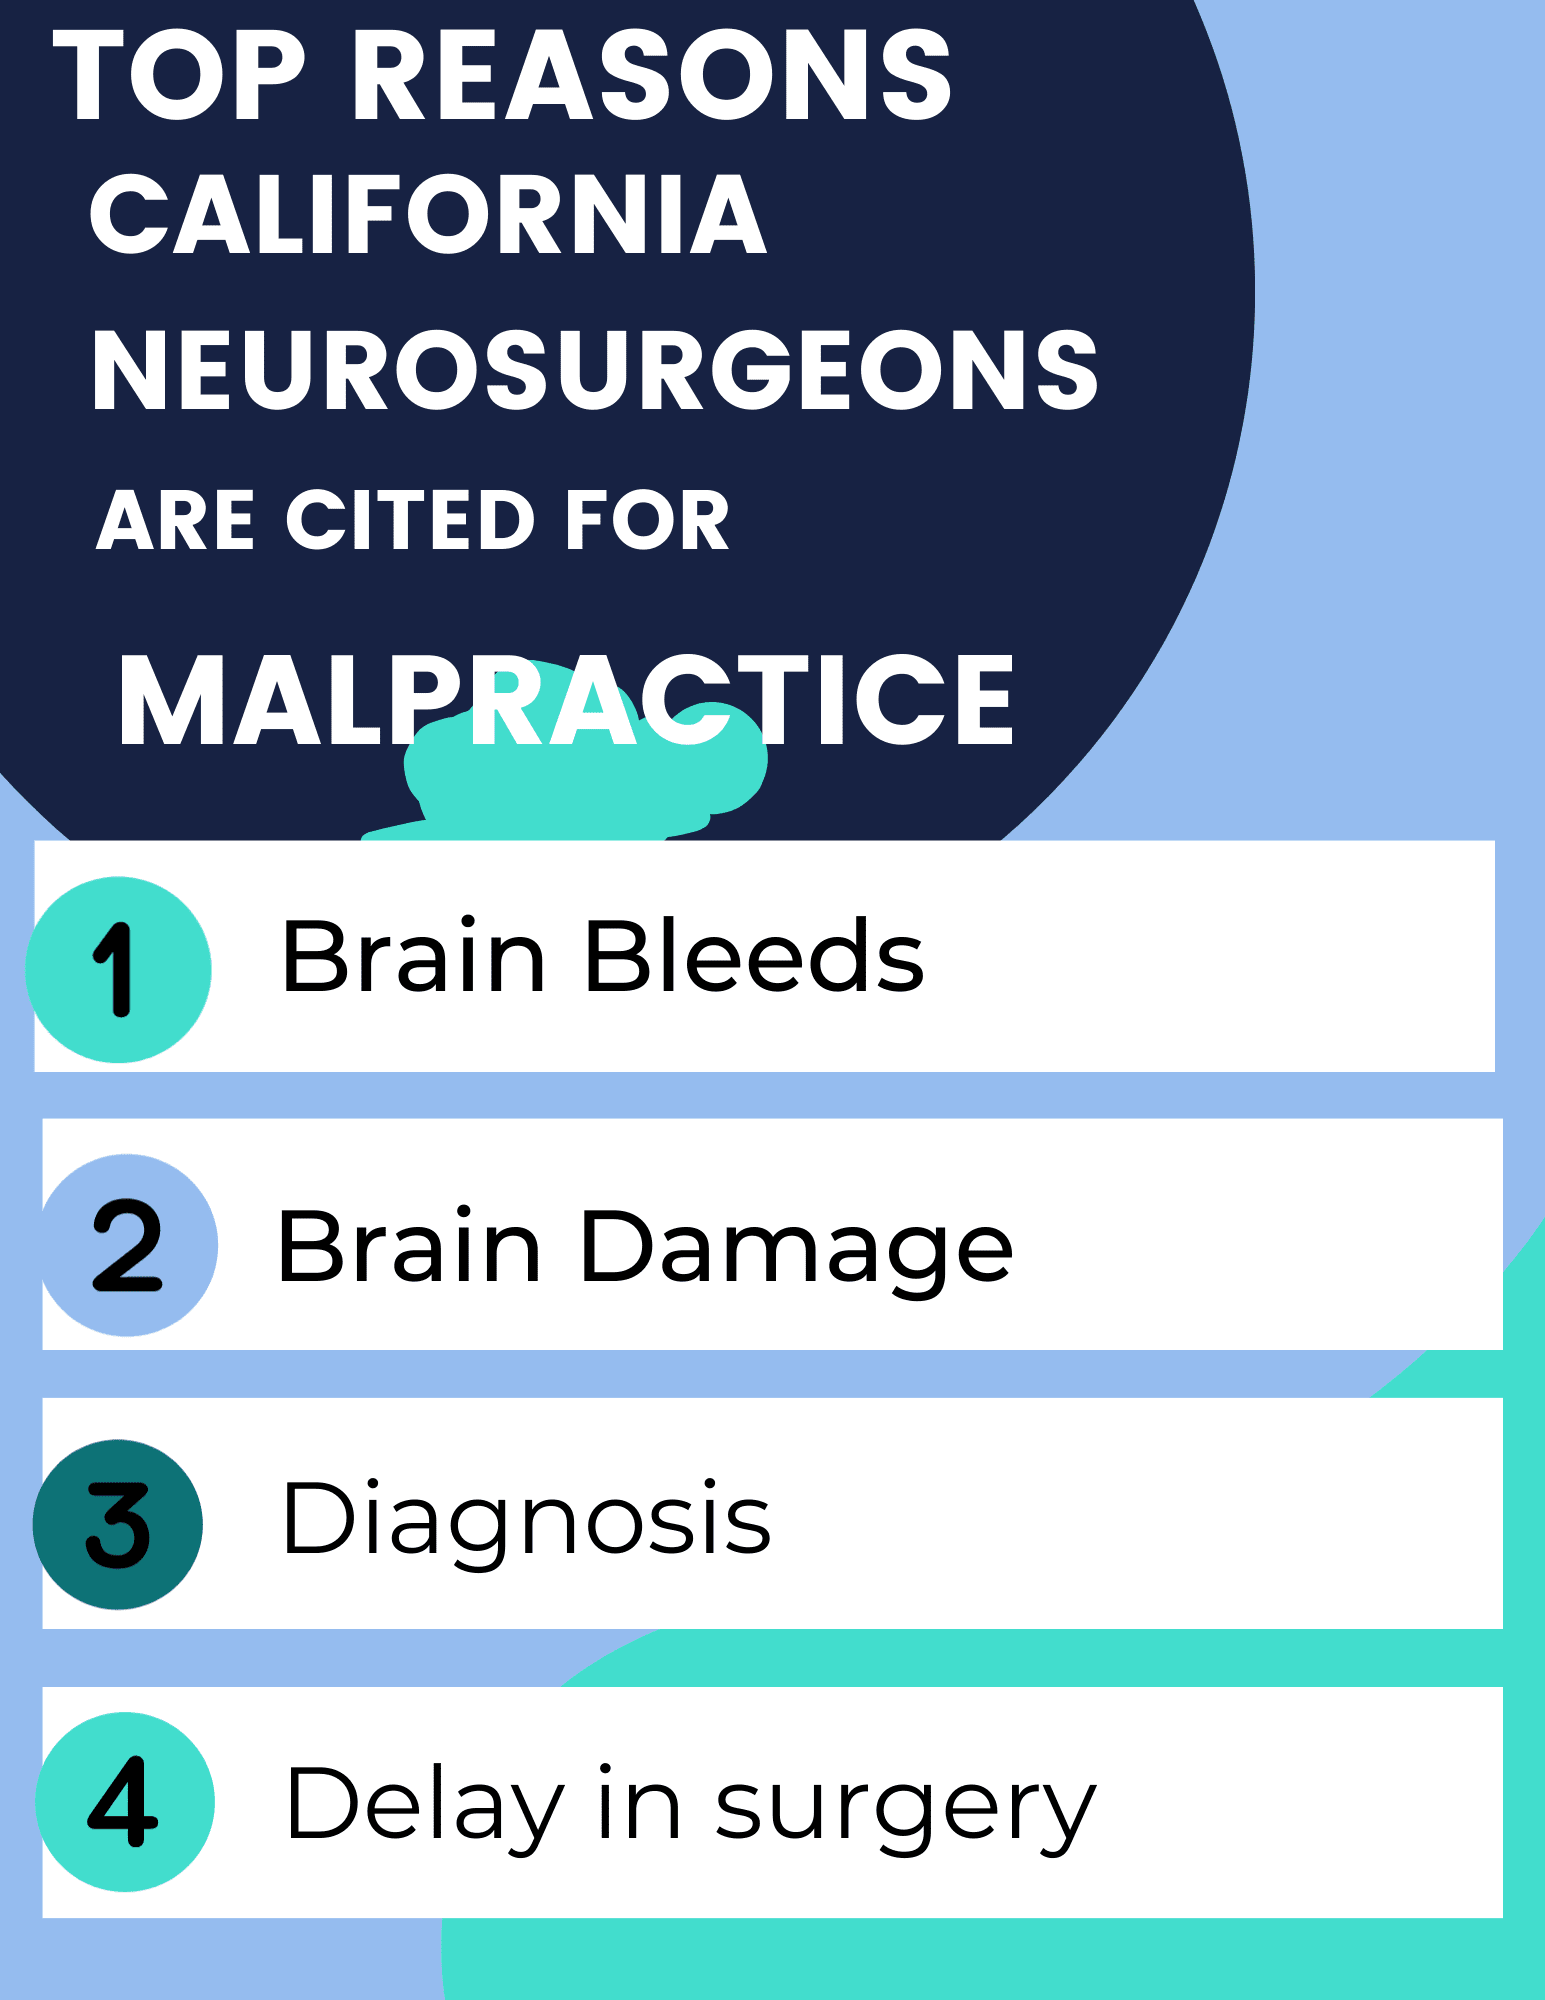 Top reasons that neurosurgeons in CA are cited for malpractice